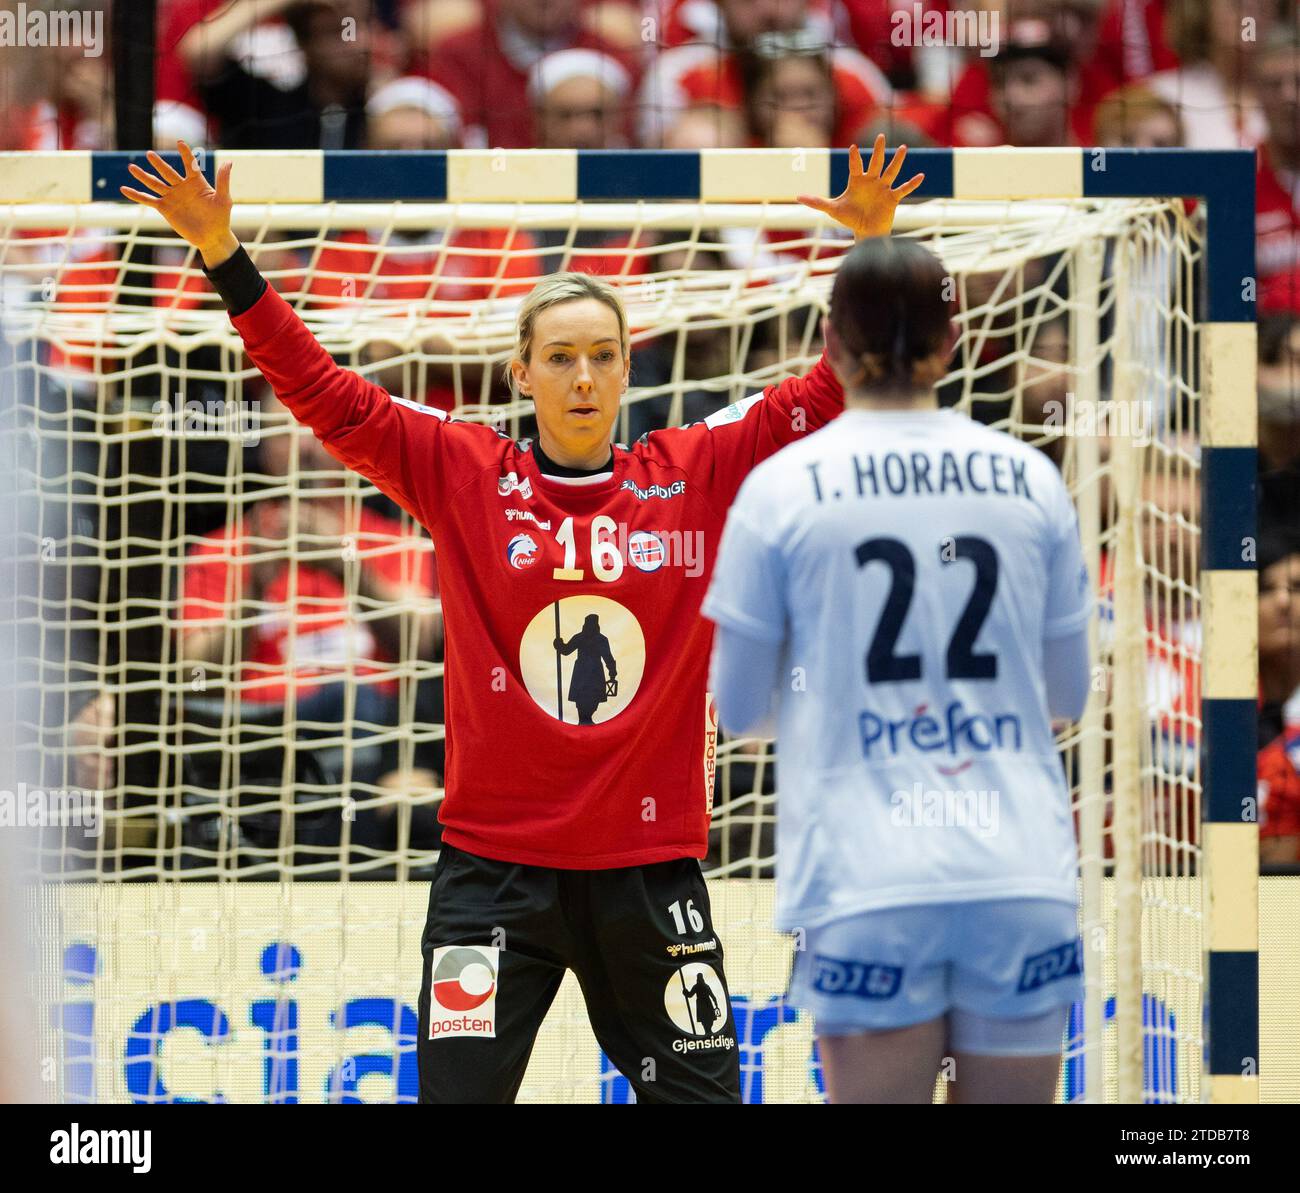 Herning, Denmark. 17th Dec, 2023. Herning, Denmark, December 17th 2023: Goalkeeper Katrine Lunde (16 Norway) are seen during a penalty shot during the IHF Womens World Championship 2023 final game between France and Norway at Jyske Bank Boxen in Herning, Denmark (Ane Frosaker/SPP) Credit: SPP Sport Press Photo. /Alamy Live News Stock Photo